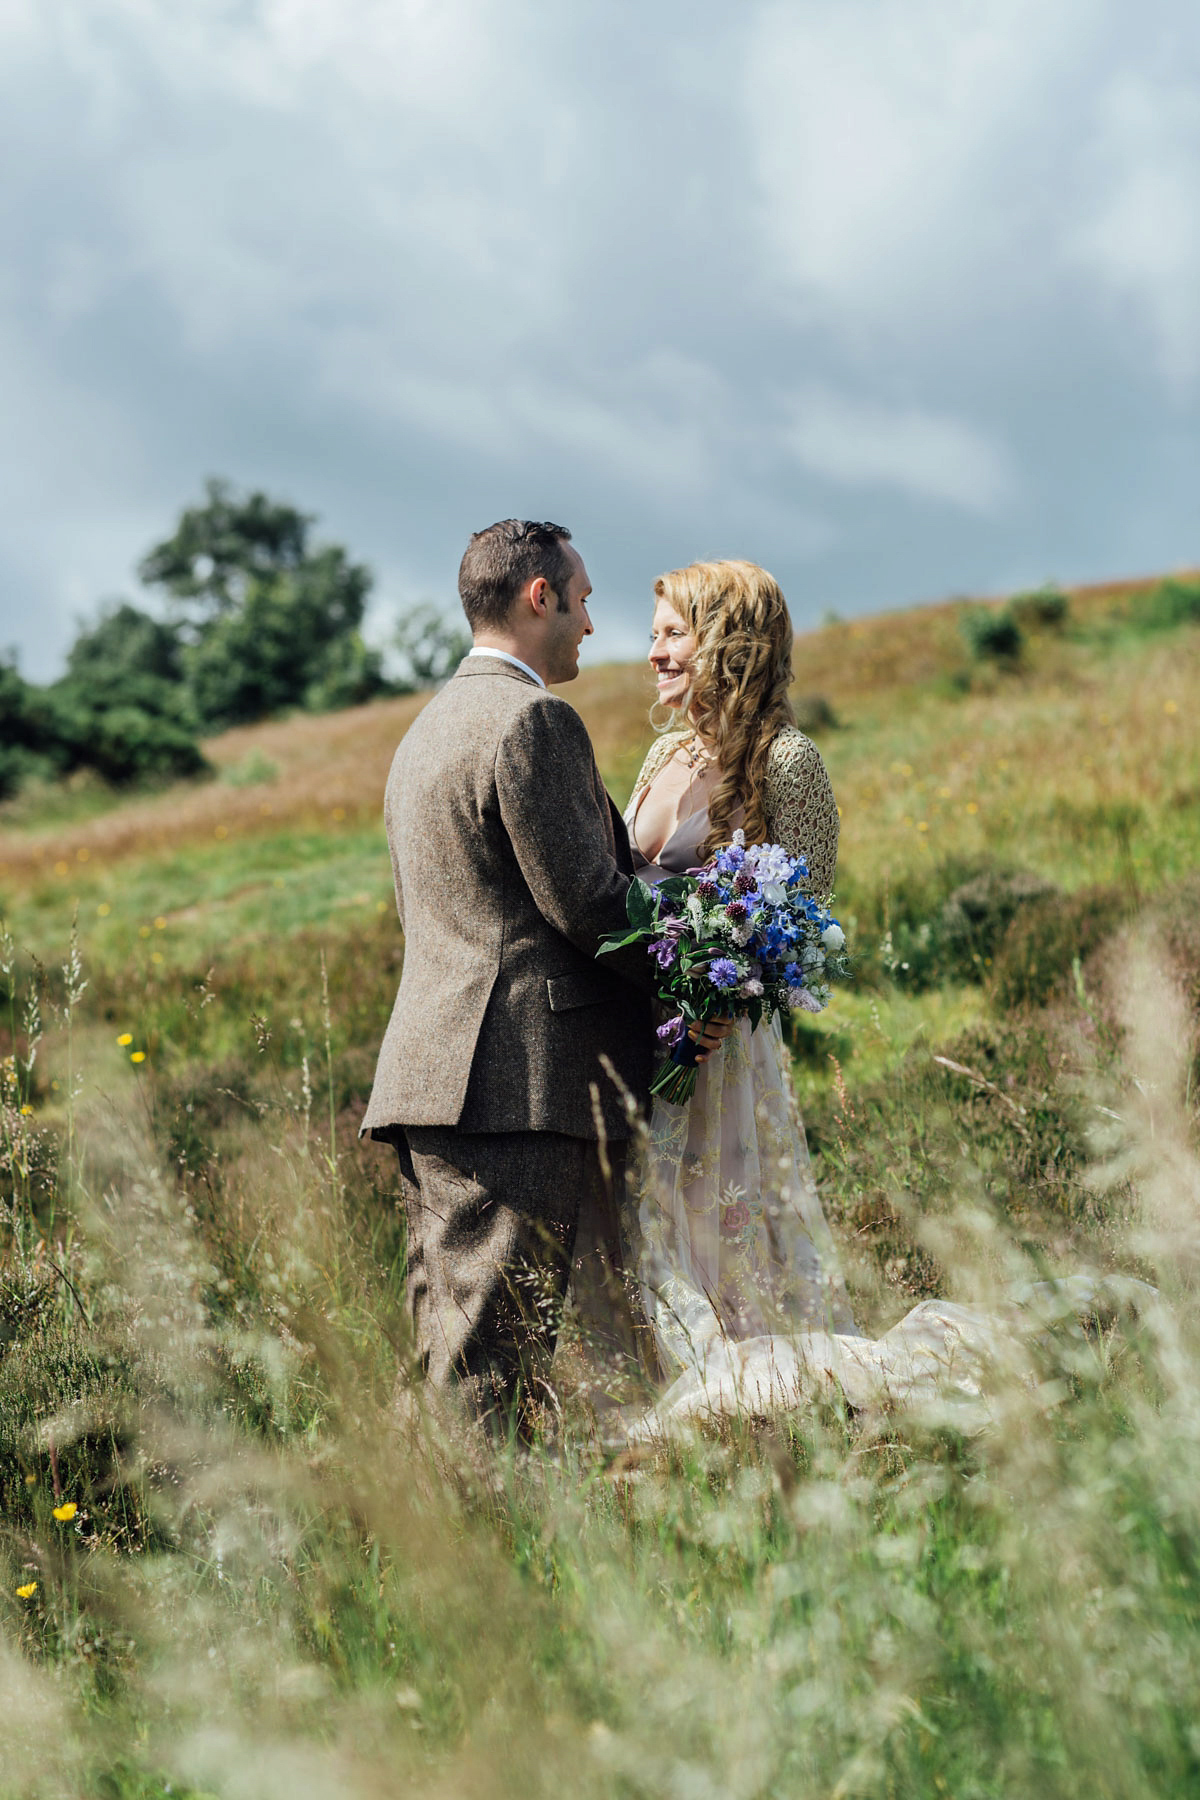 Bride Tatiana wore the Ireland gown by BHLDN for her Scottish elopement. Photography by Carley Buick.